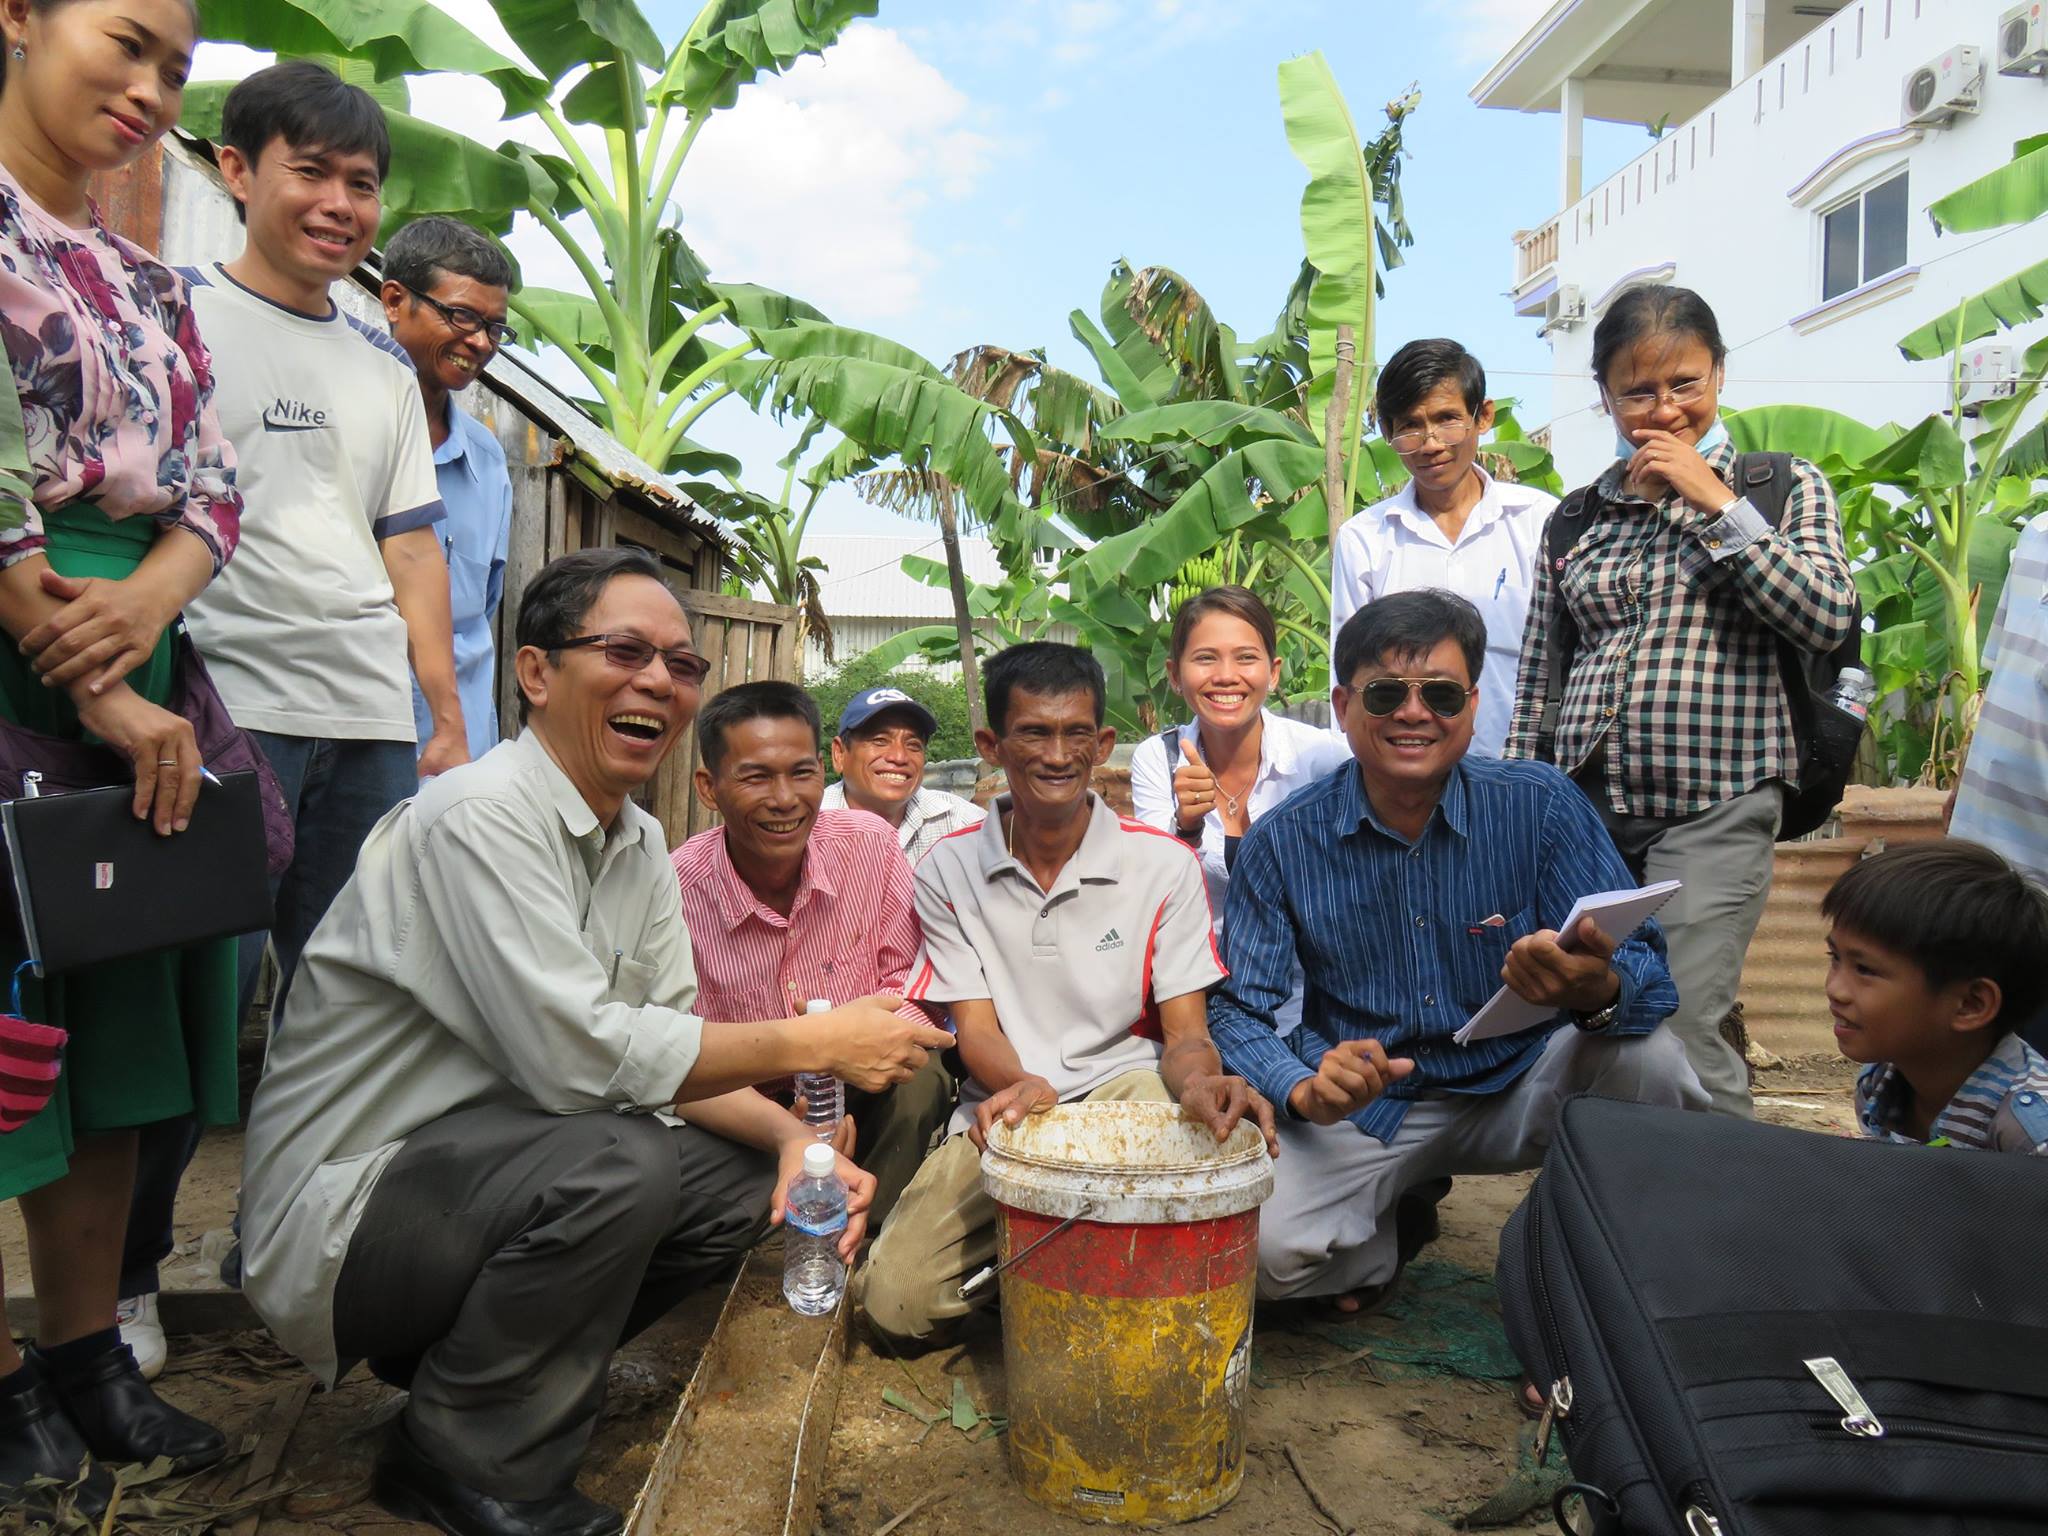 AUA staff learn about Salvation Centre Cambodia's income-generating projects on an exchange visit to Siem Reap in 2015.